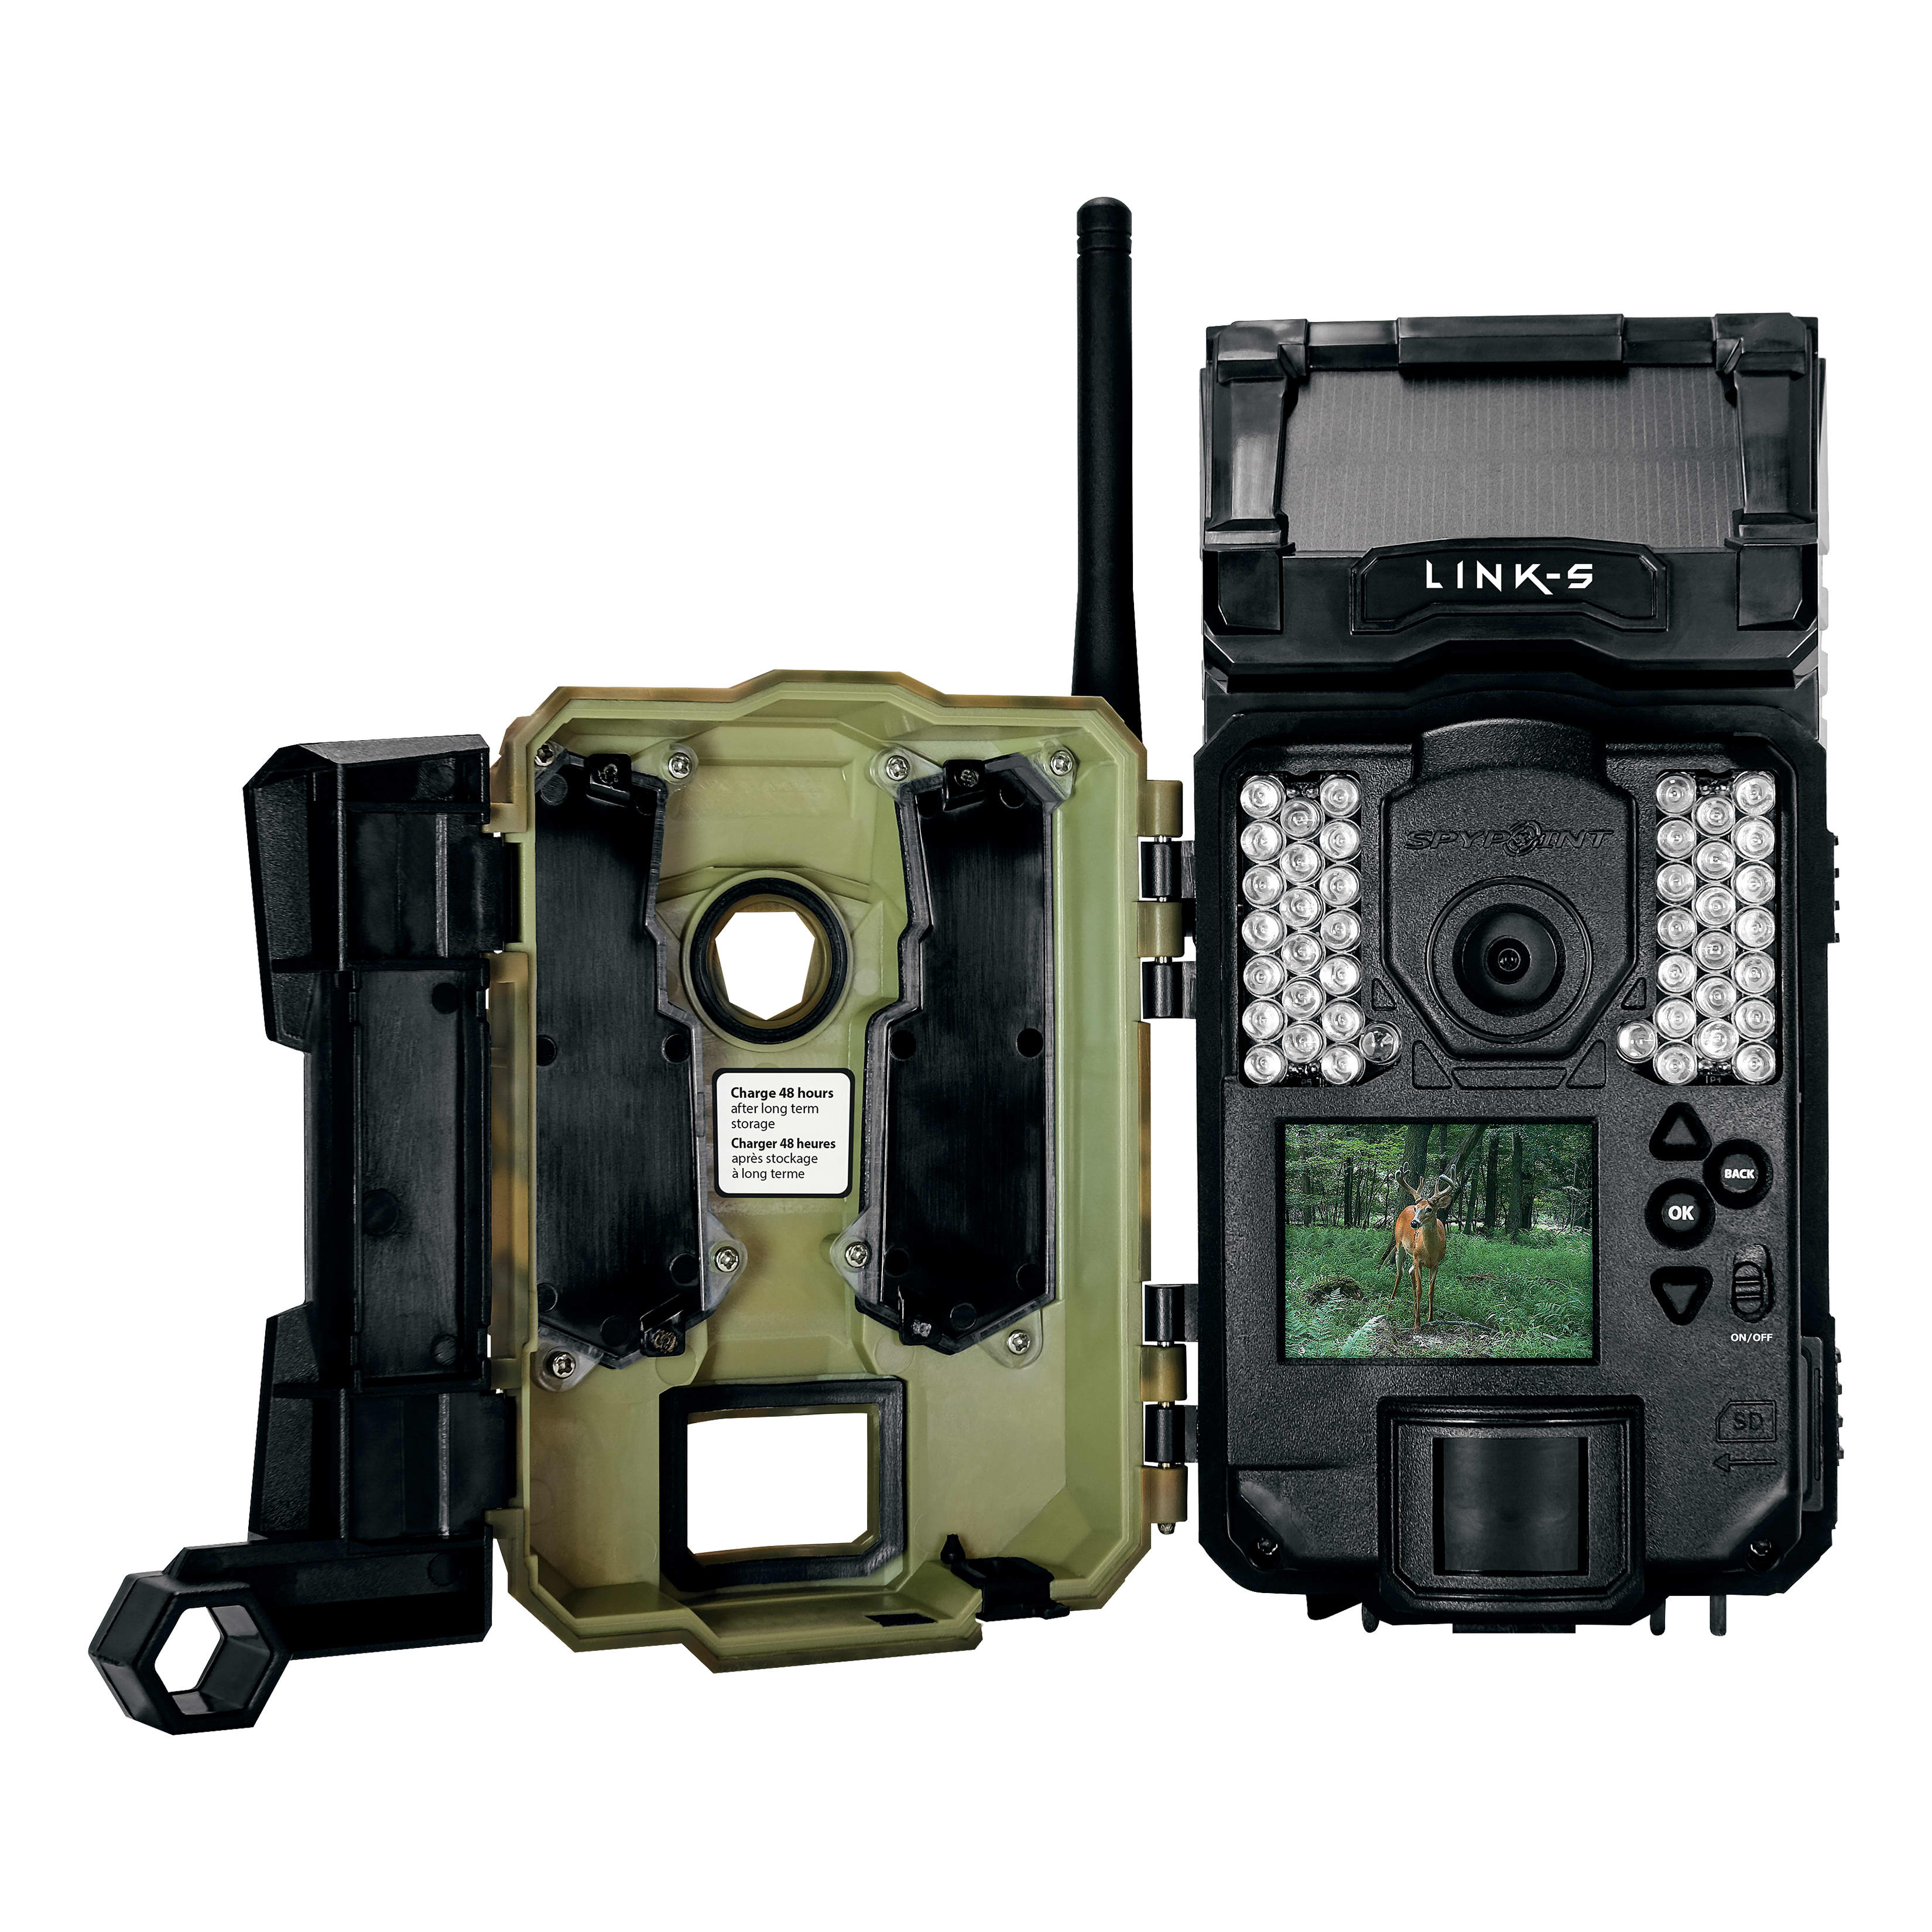 SPYPOINT® LINK-S Solar LTE Cellular Trail Camera - Inside View